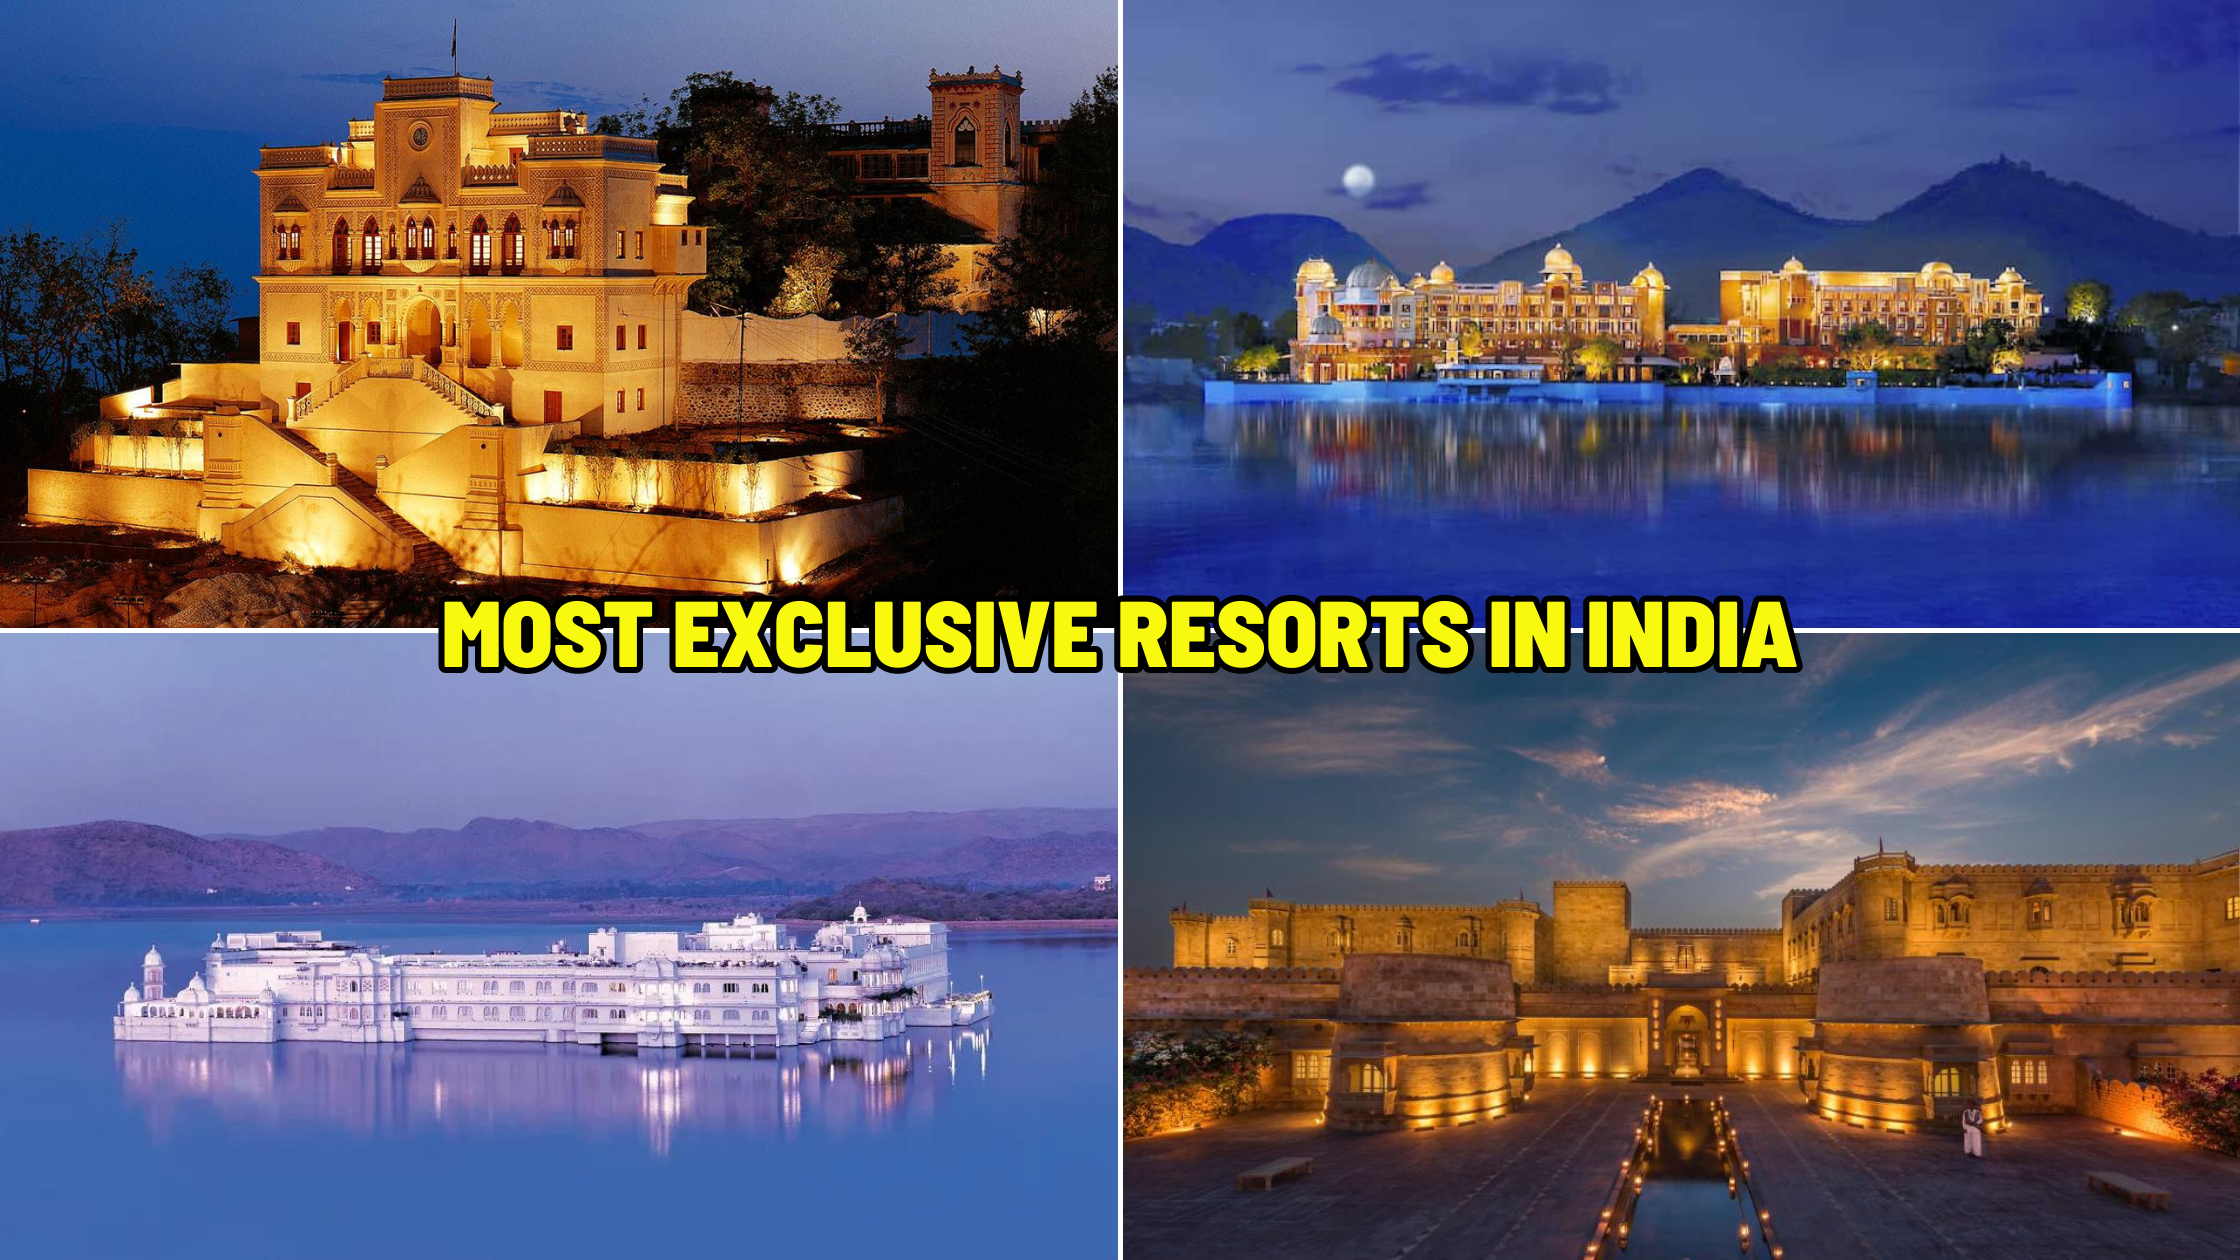 Luxury Getaways: 10 Most Exclusive Resorts in India for a Lavish Retreat